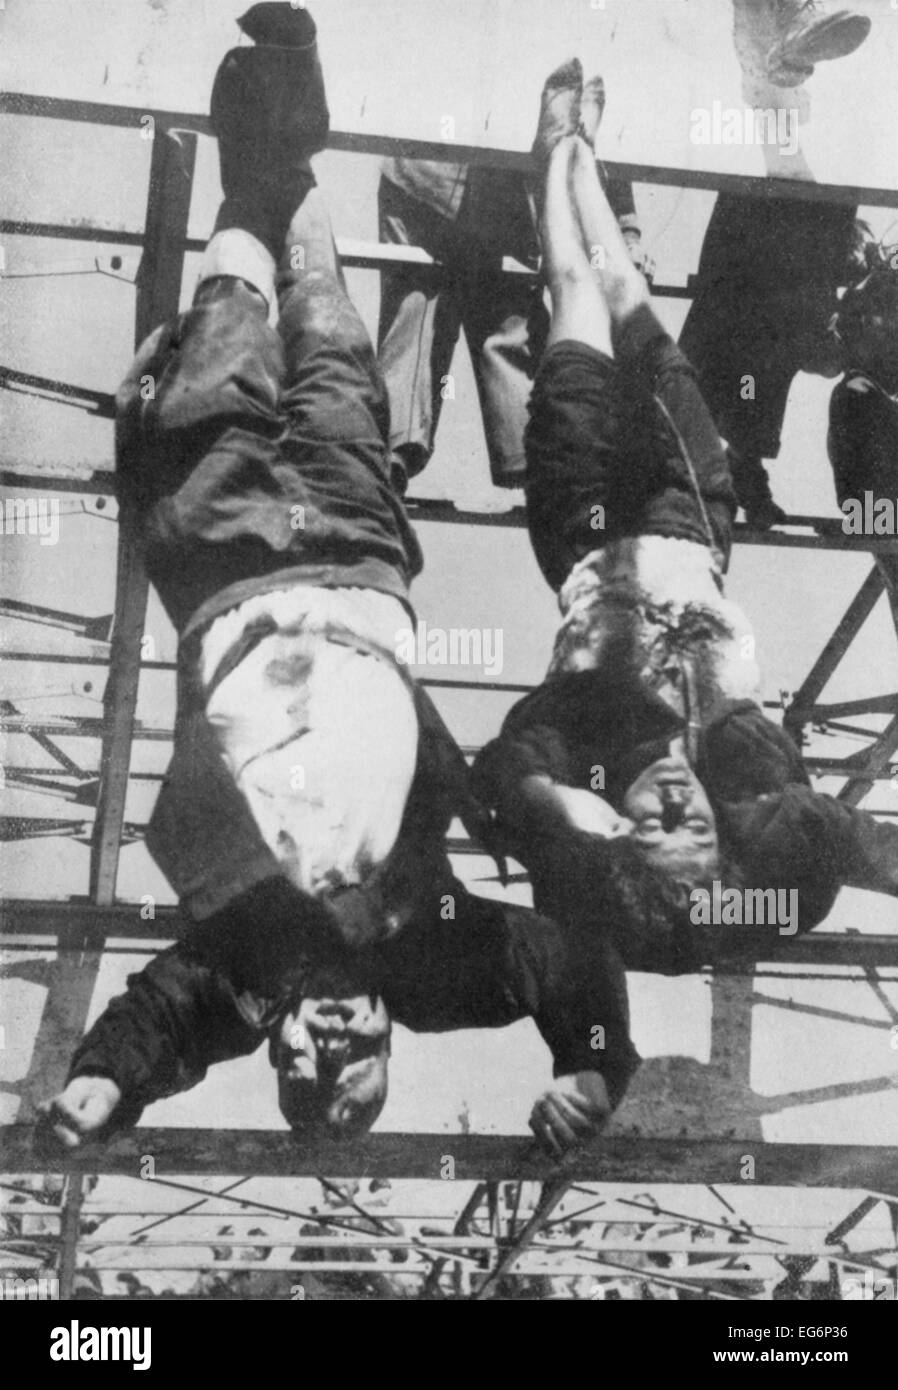 Executed Benito Mussolini and mistress, Clara Petacci, hanging by feet. Milan, Italy, May 1945. World War 2. (BSLOC_2014_10_54) Stock Photo